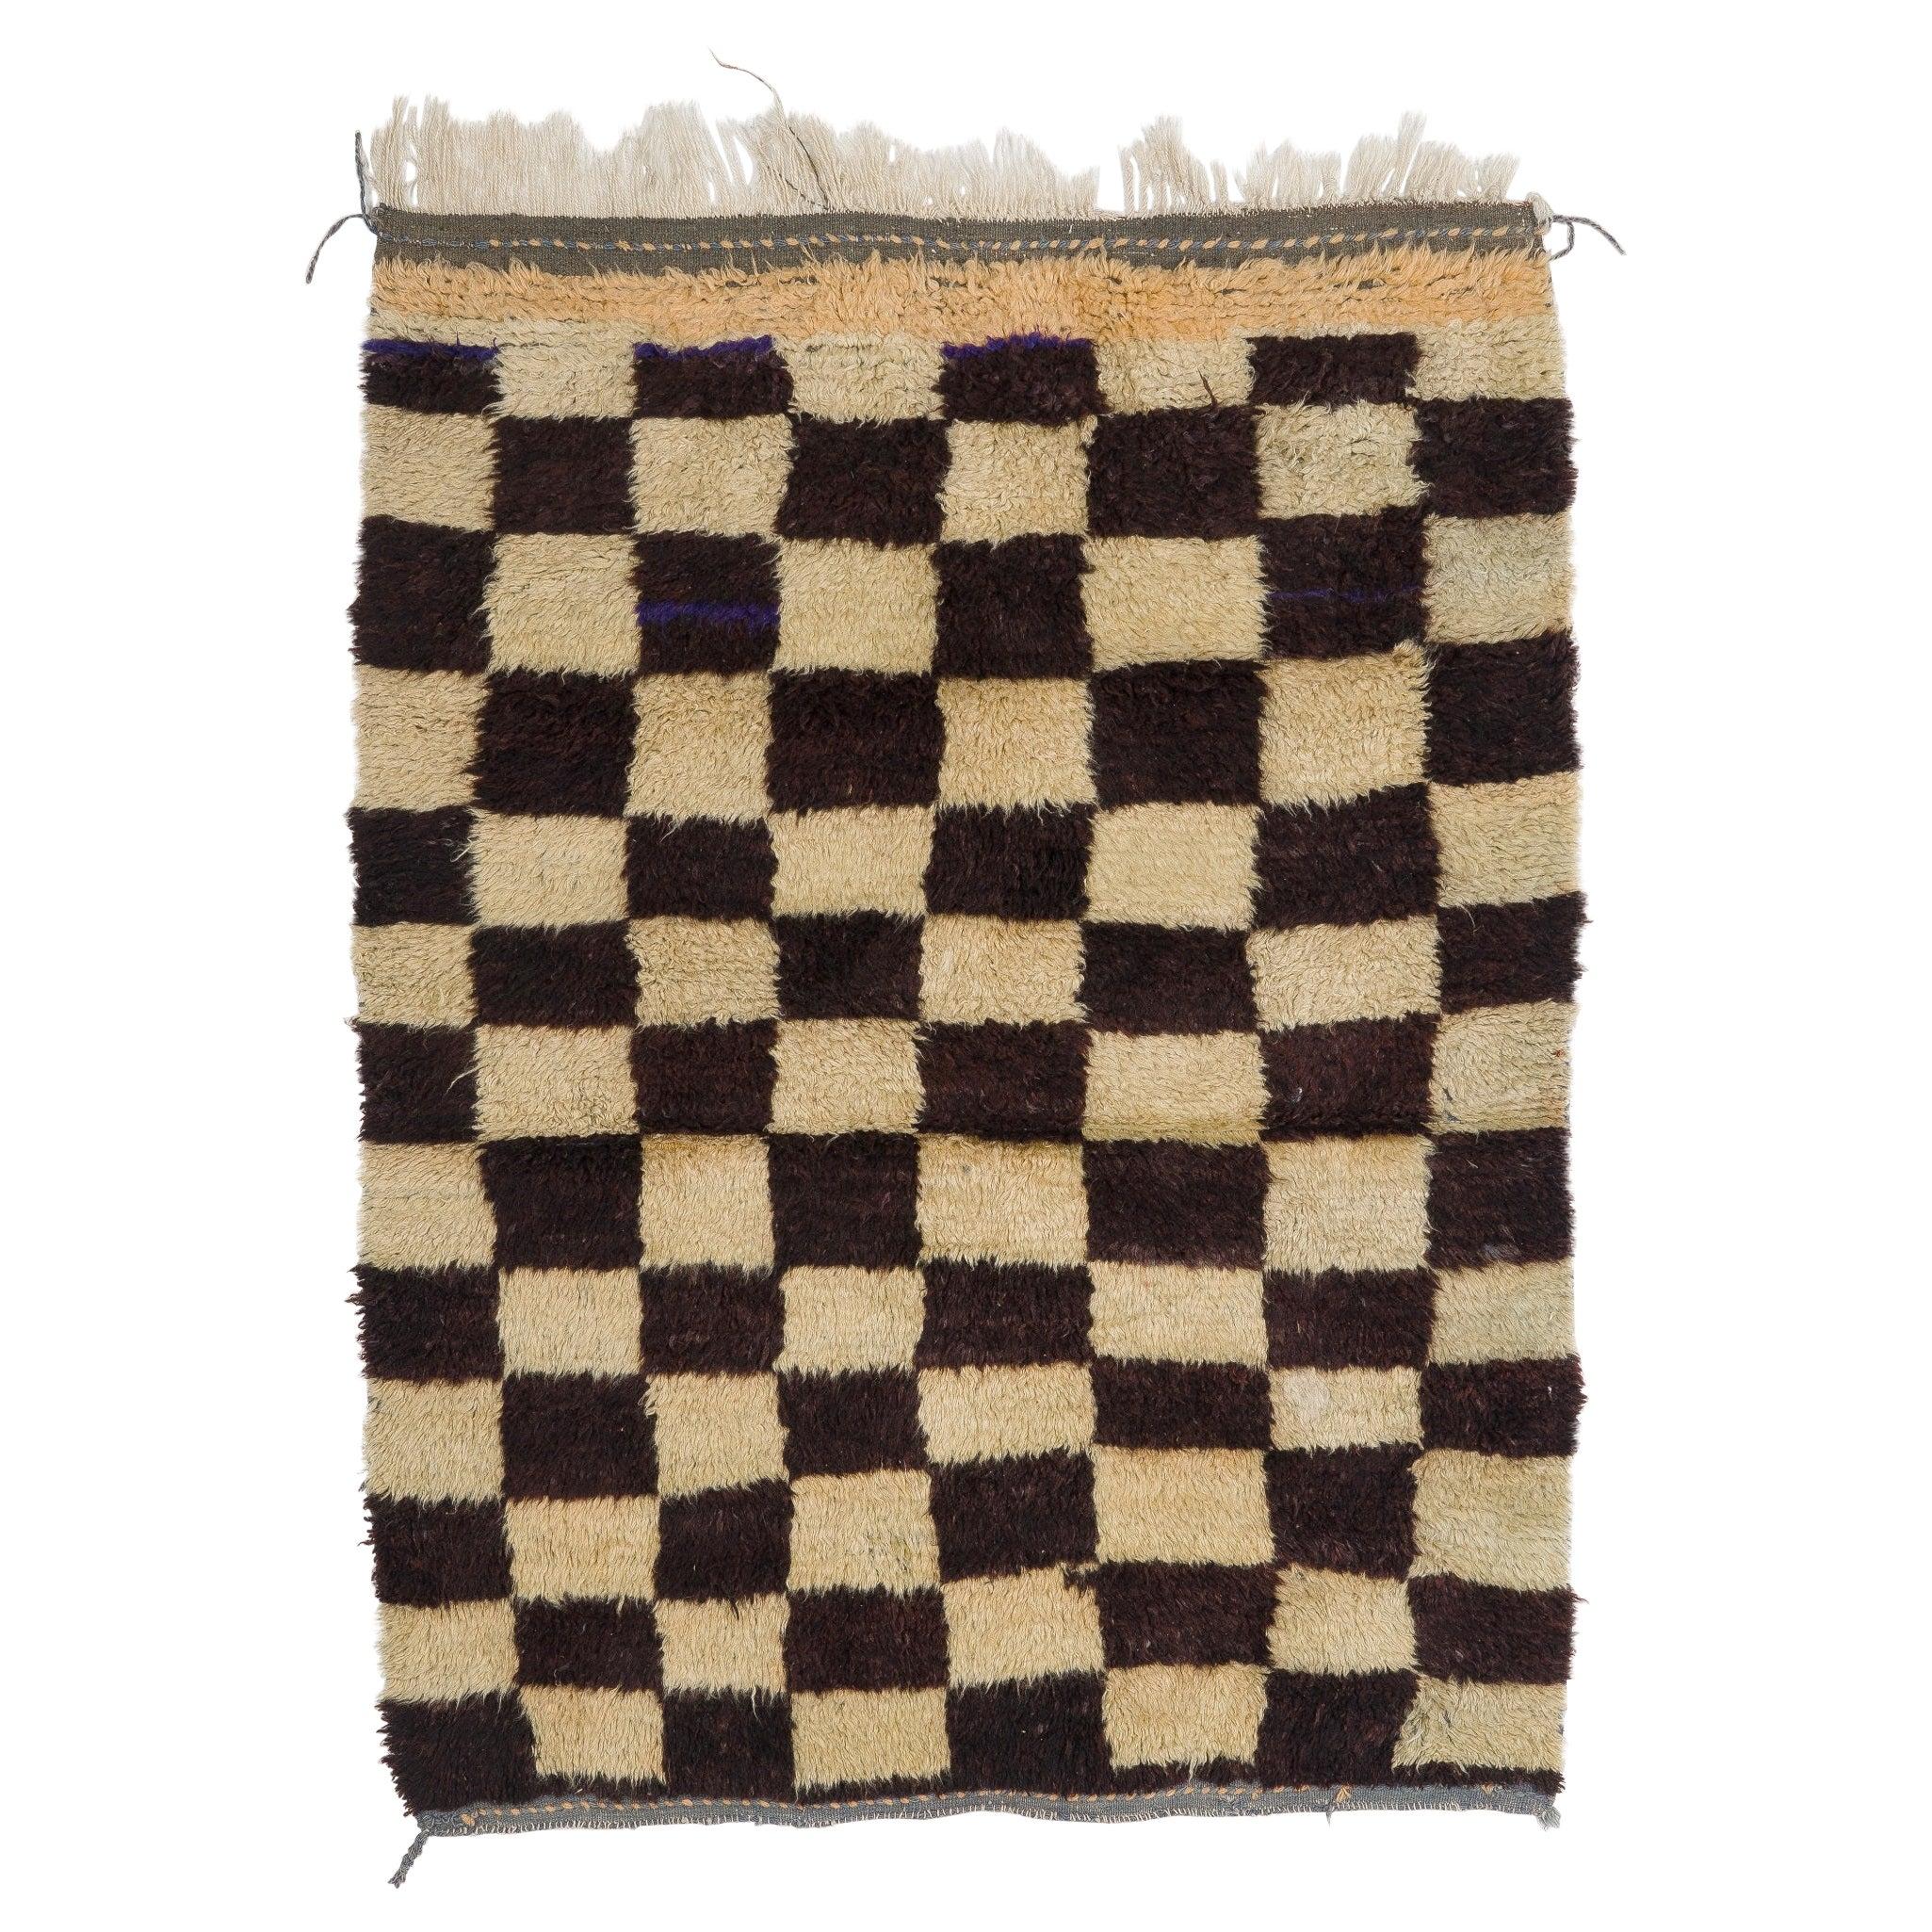 5x6 Ft Vintage Chessboard Design Anatolian "Tulu" Rug, Natural Un-Dyed Wool